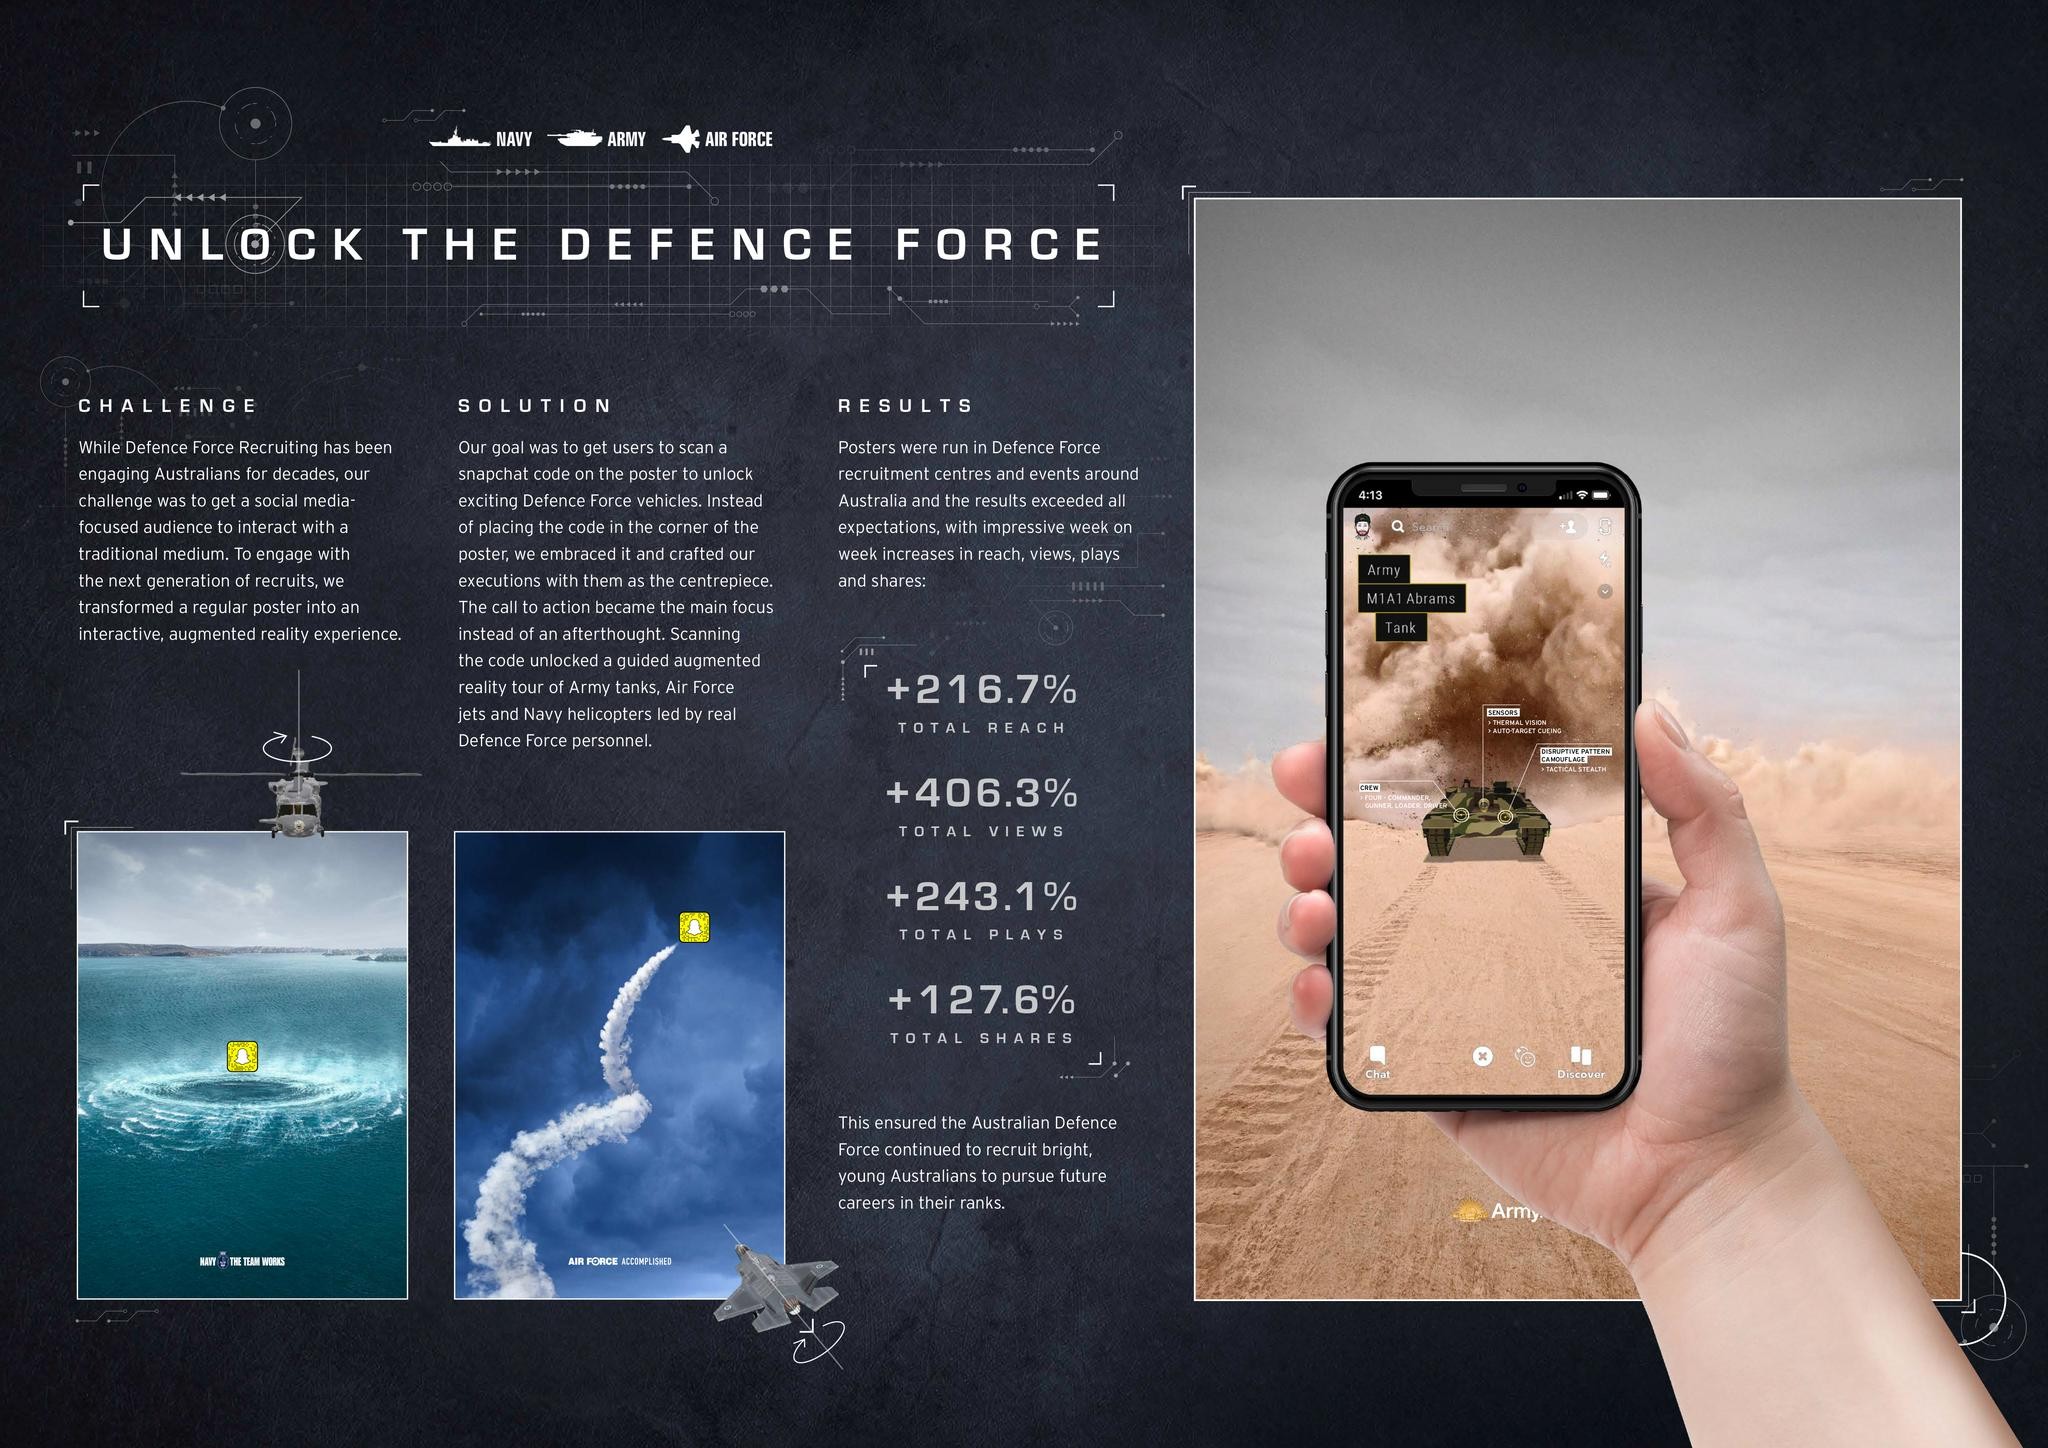 UNLOCK THE DEFENCE FORCE - JET